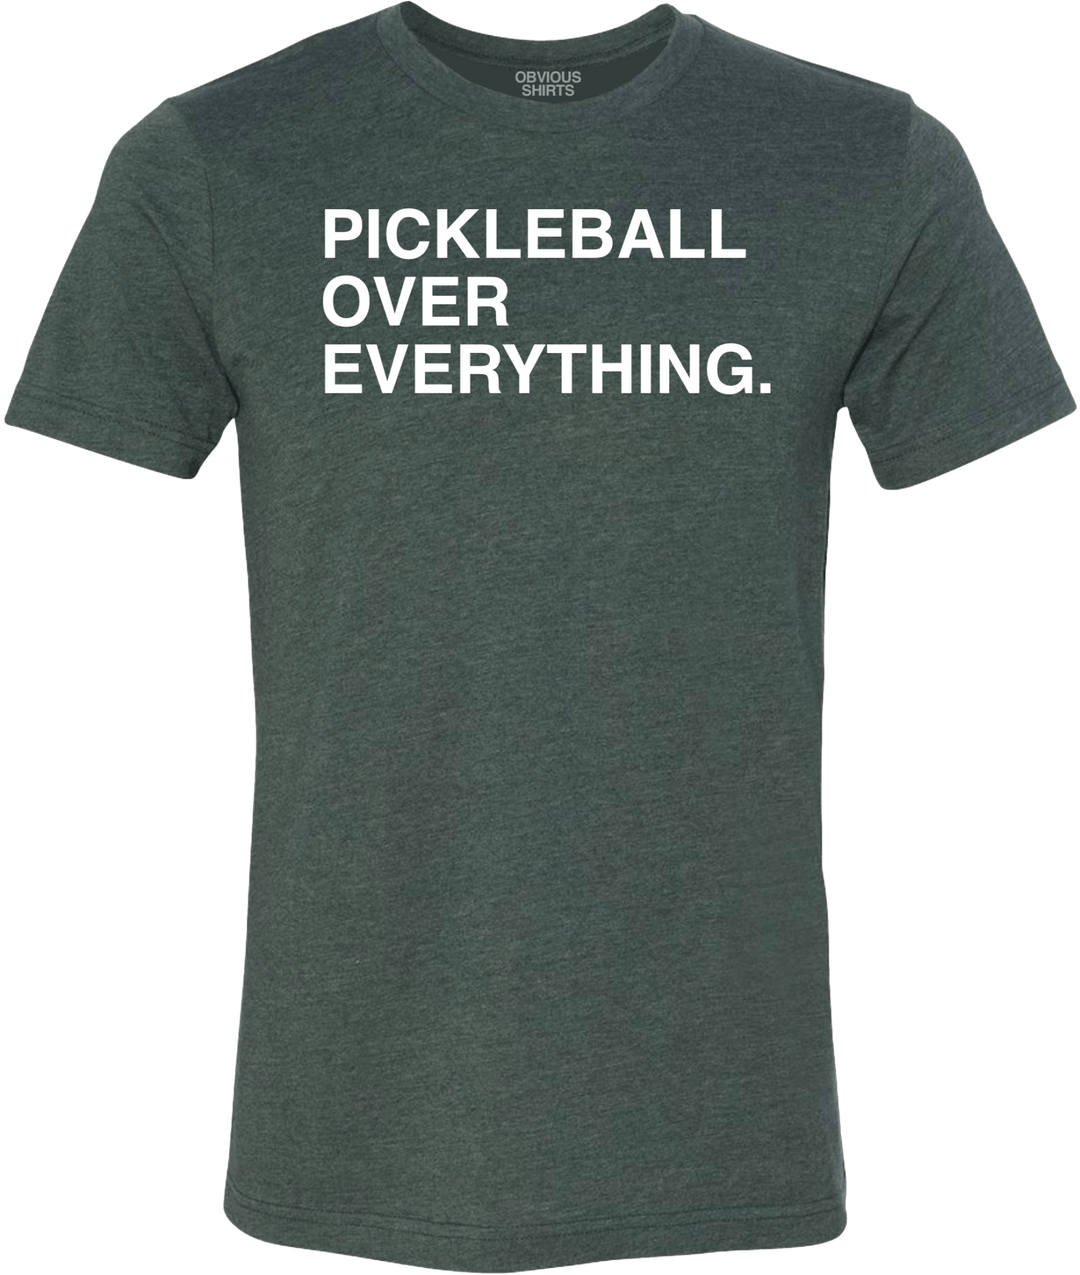 PICKLEBALL OVER EVERYTHING. - OBVIOUS SHIRTS